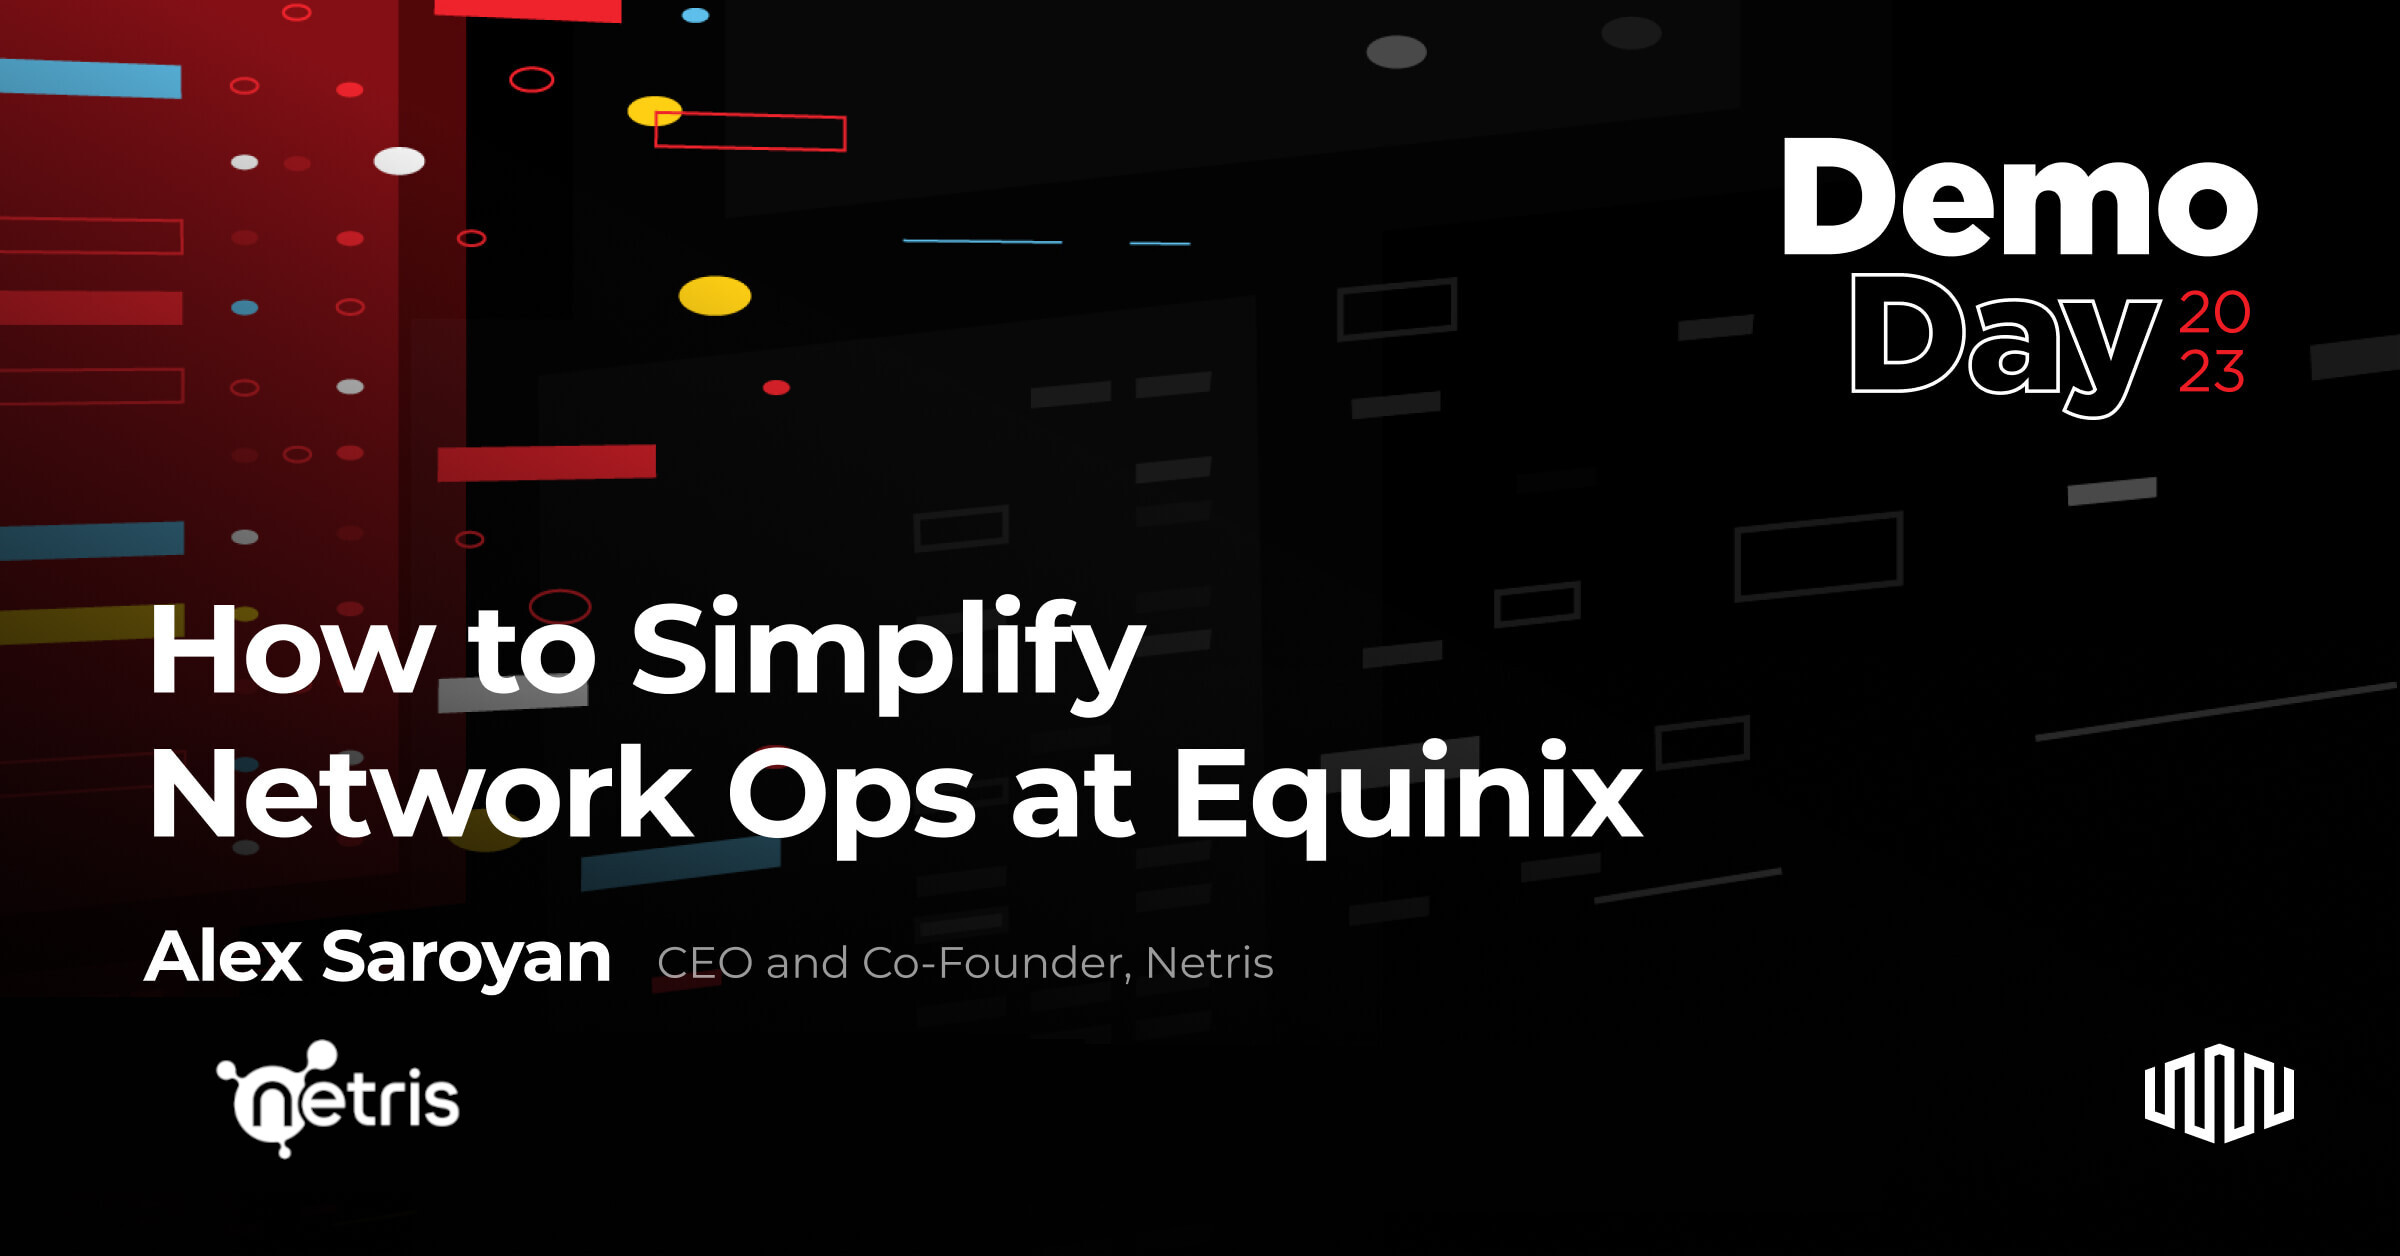 How to Simplify Network Ops at Equinix Demo Day